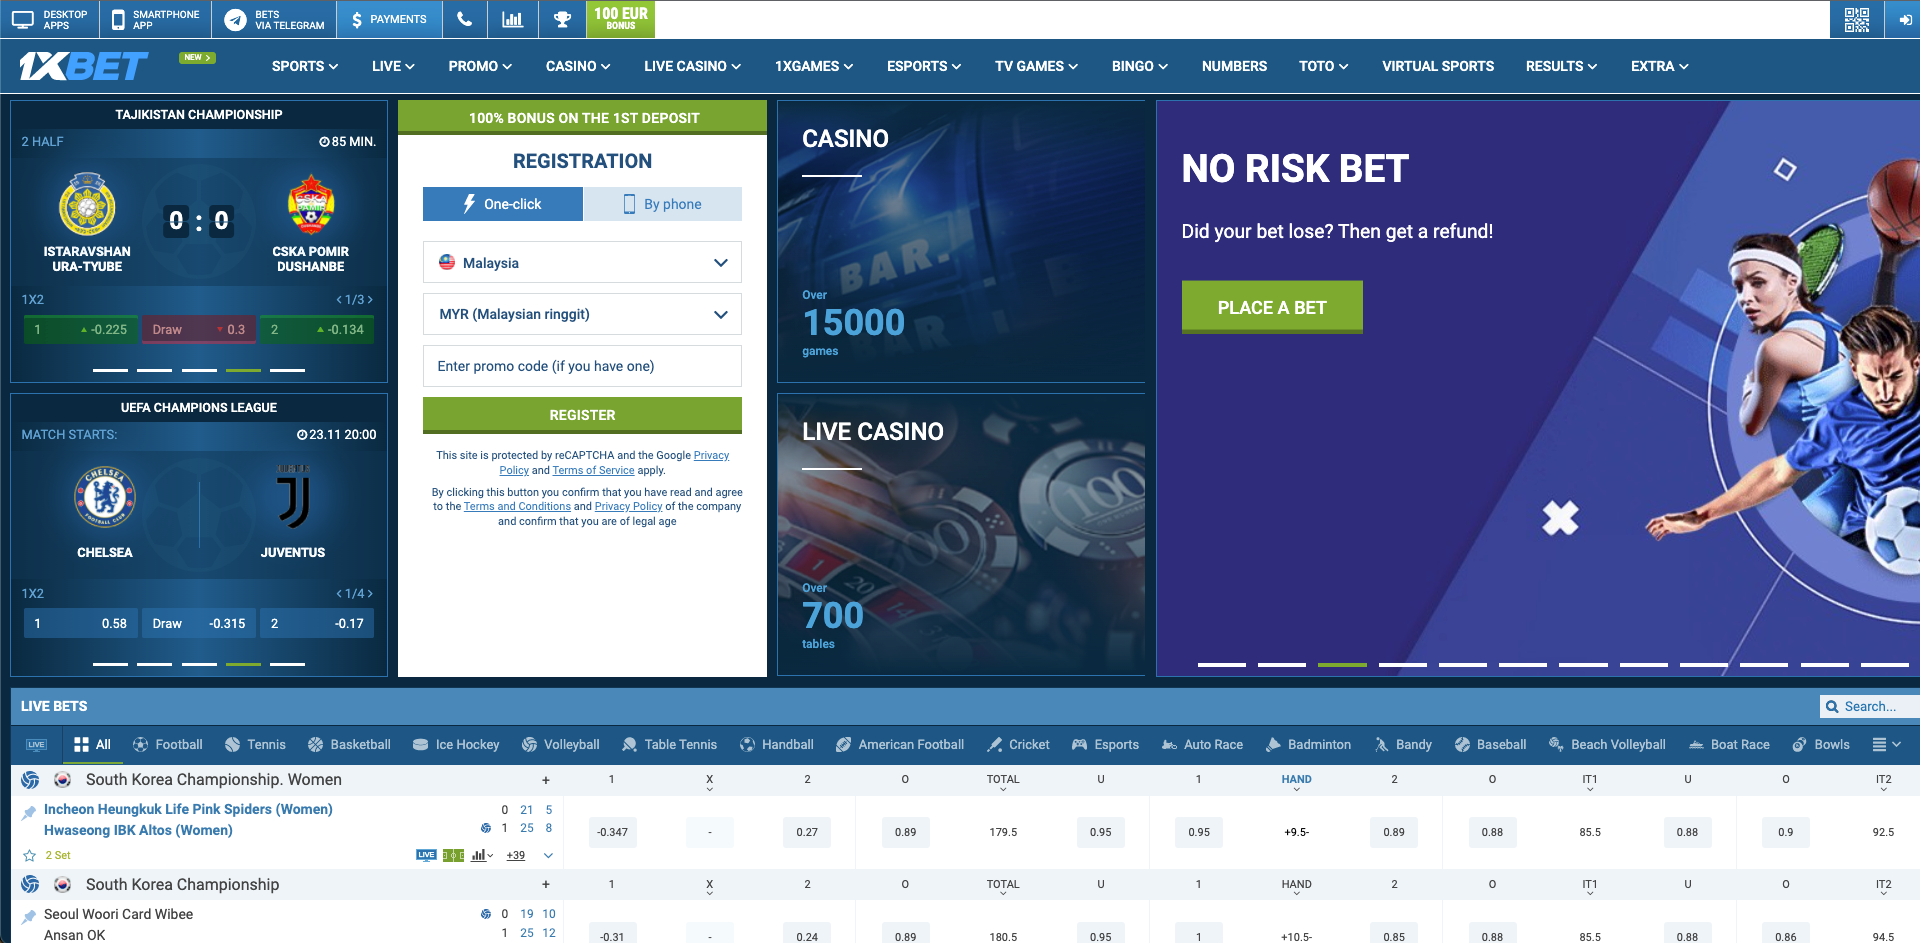 1xbet sportsbook malaysia - successful registration page screen